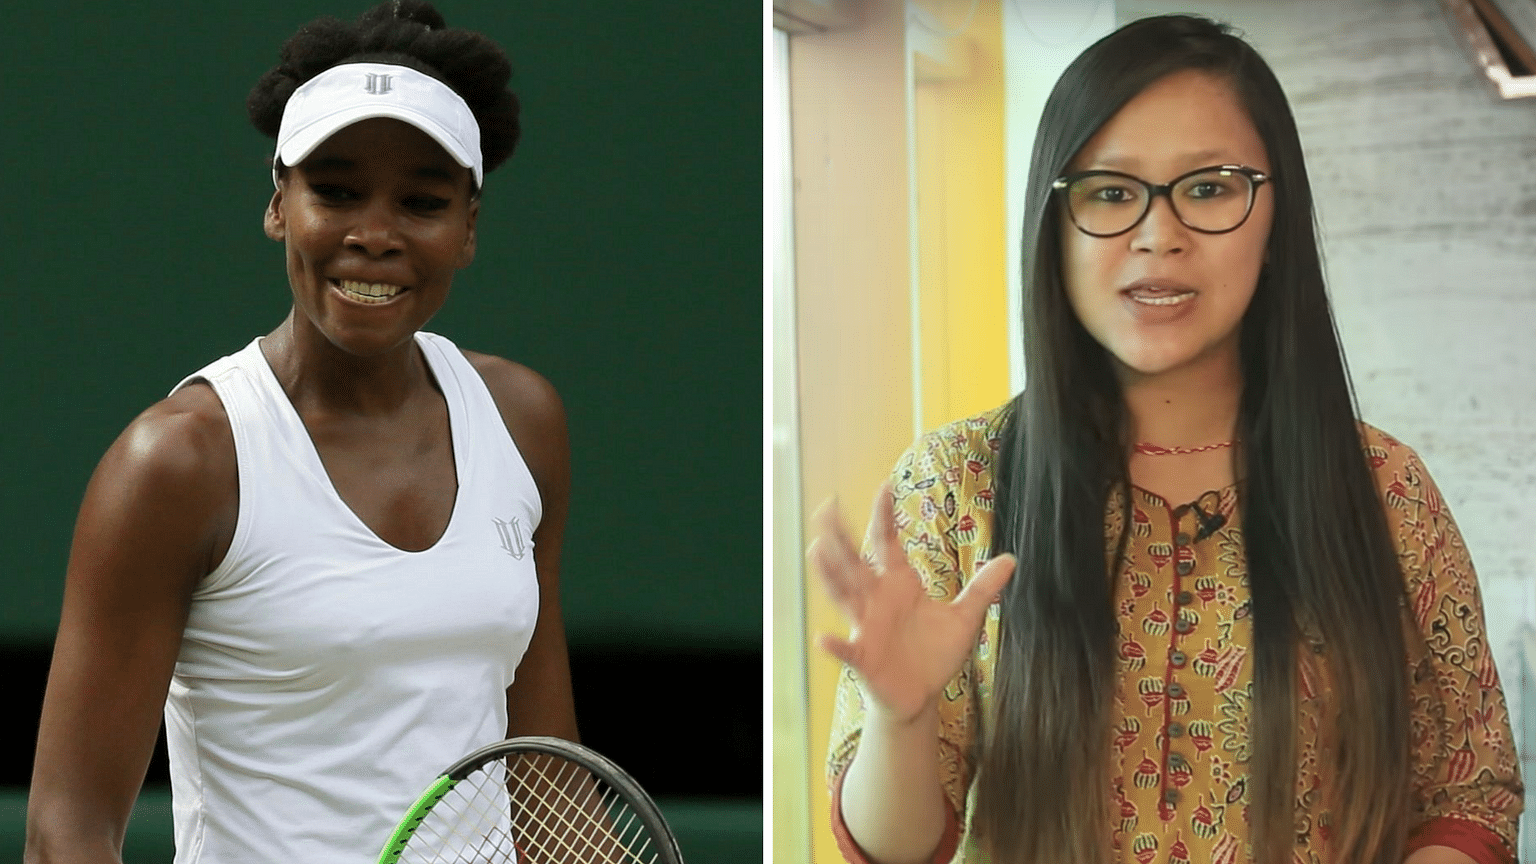 Venus Williams may not have won as many titles as her little sister but her legacy will be one as great.&nbsp;